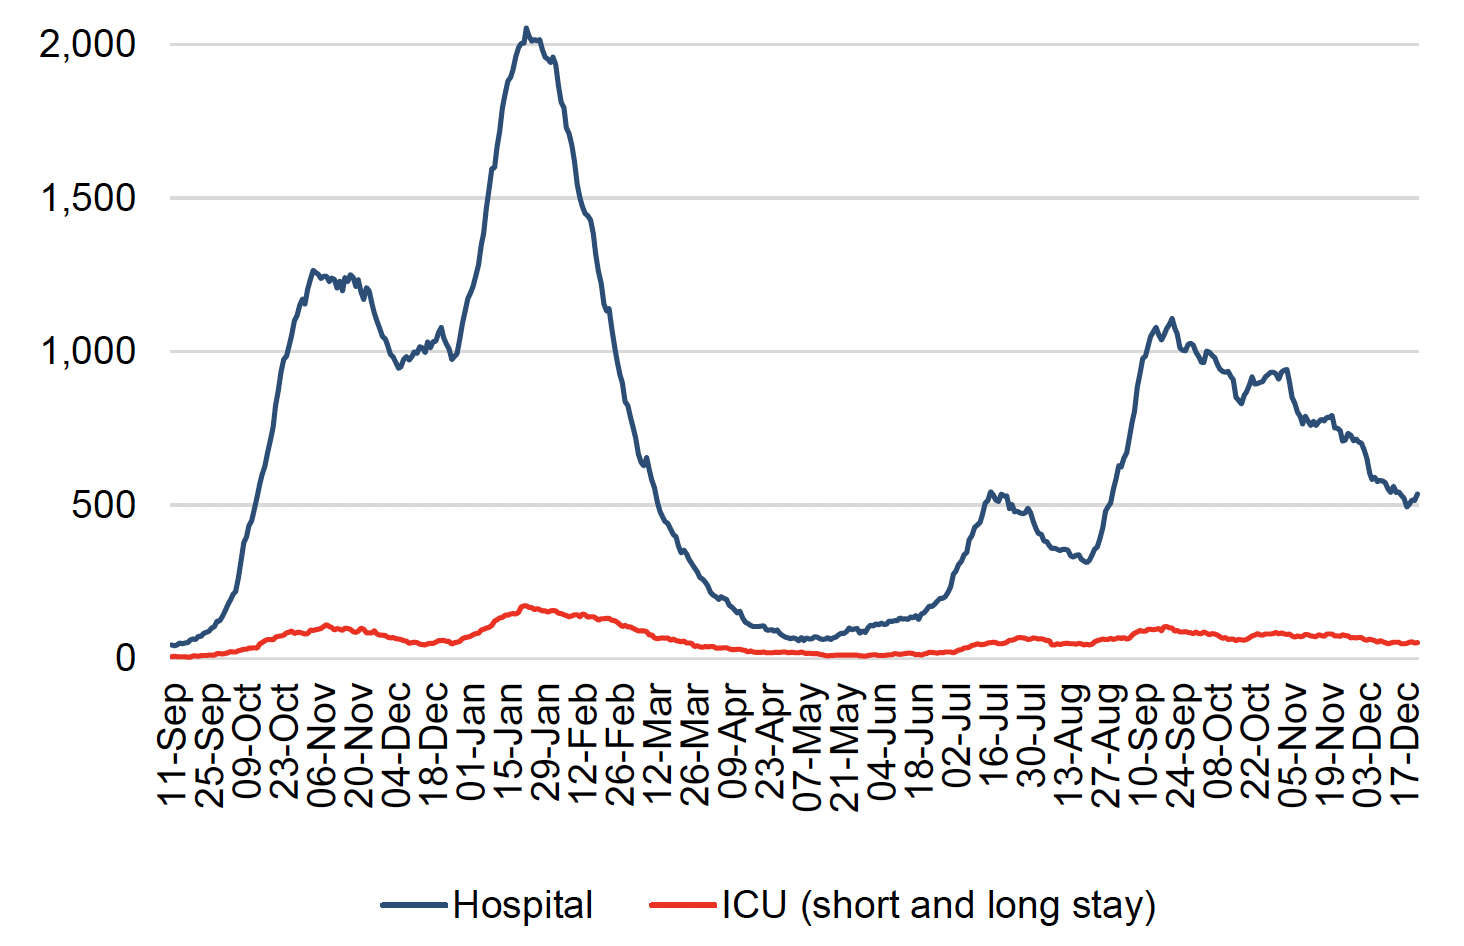 This line chart shows the daily number of patients in hospital and ICU (or combined ICU/ HDU) across Scotland with recently confirmed Covid-19 with a length of stay of 28 days or less since 11 September 2020. Covid-19 patients in hospital (including those in ICU) increased sharply from the end-September 2020 reaching a peak at the beginning of November. Patients in hospital then stabilised before a decrease at the beginning of December. It then started rising sharply from the end of December, reaching a peak of over 2,000 on 22 January 2021. The number of patients in hospital decreased sharply since then before plateauing throughout May and June. It then rose to over 500 patients in hospital in July and decreased by the end of August. It then rose again reaching a peak of over a 1,000 patients in hospital by mid-September 2021. While the number of patients in hospital has been fluctuating since then, it has been generally declining since early October.  
A line for patients in ICU for both short and long stay follows a similar pattern with an increase seen for short stay patients from end-September 2020. It then reached a peak of over 100 patients in ICU with length of stay 28 days or less at the beginning of November and then decreased to just below 50 patients in ICU in December 2020. Then a sharper increase is seen in patients in ICU for short and long stay by the end of January 2021 before it started to decrease. The number of patients in ICU remained low throughout late spring and early summer before a slight increase in July 2021. It then decreased a little before a further increase by mid-September. Covid-19 ICU occupancy has fluctuated and has decreased slightly overall since then. 
